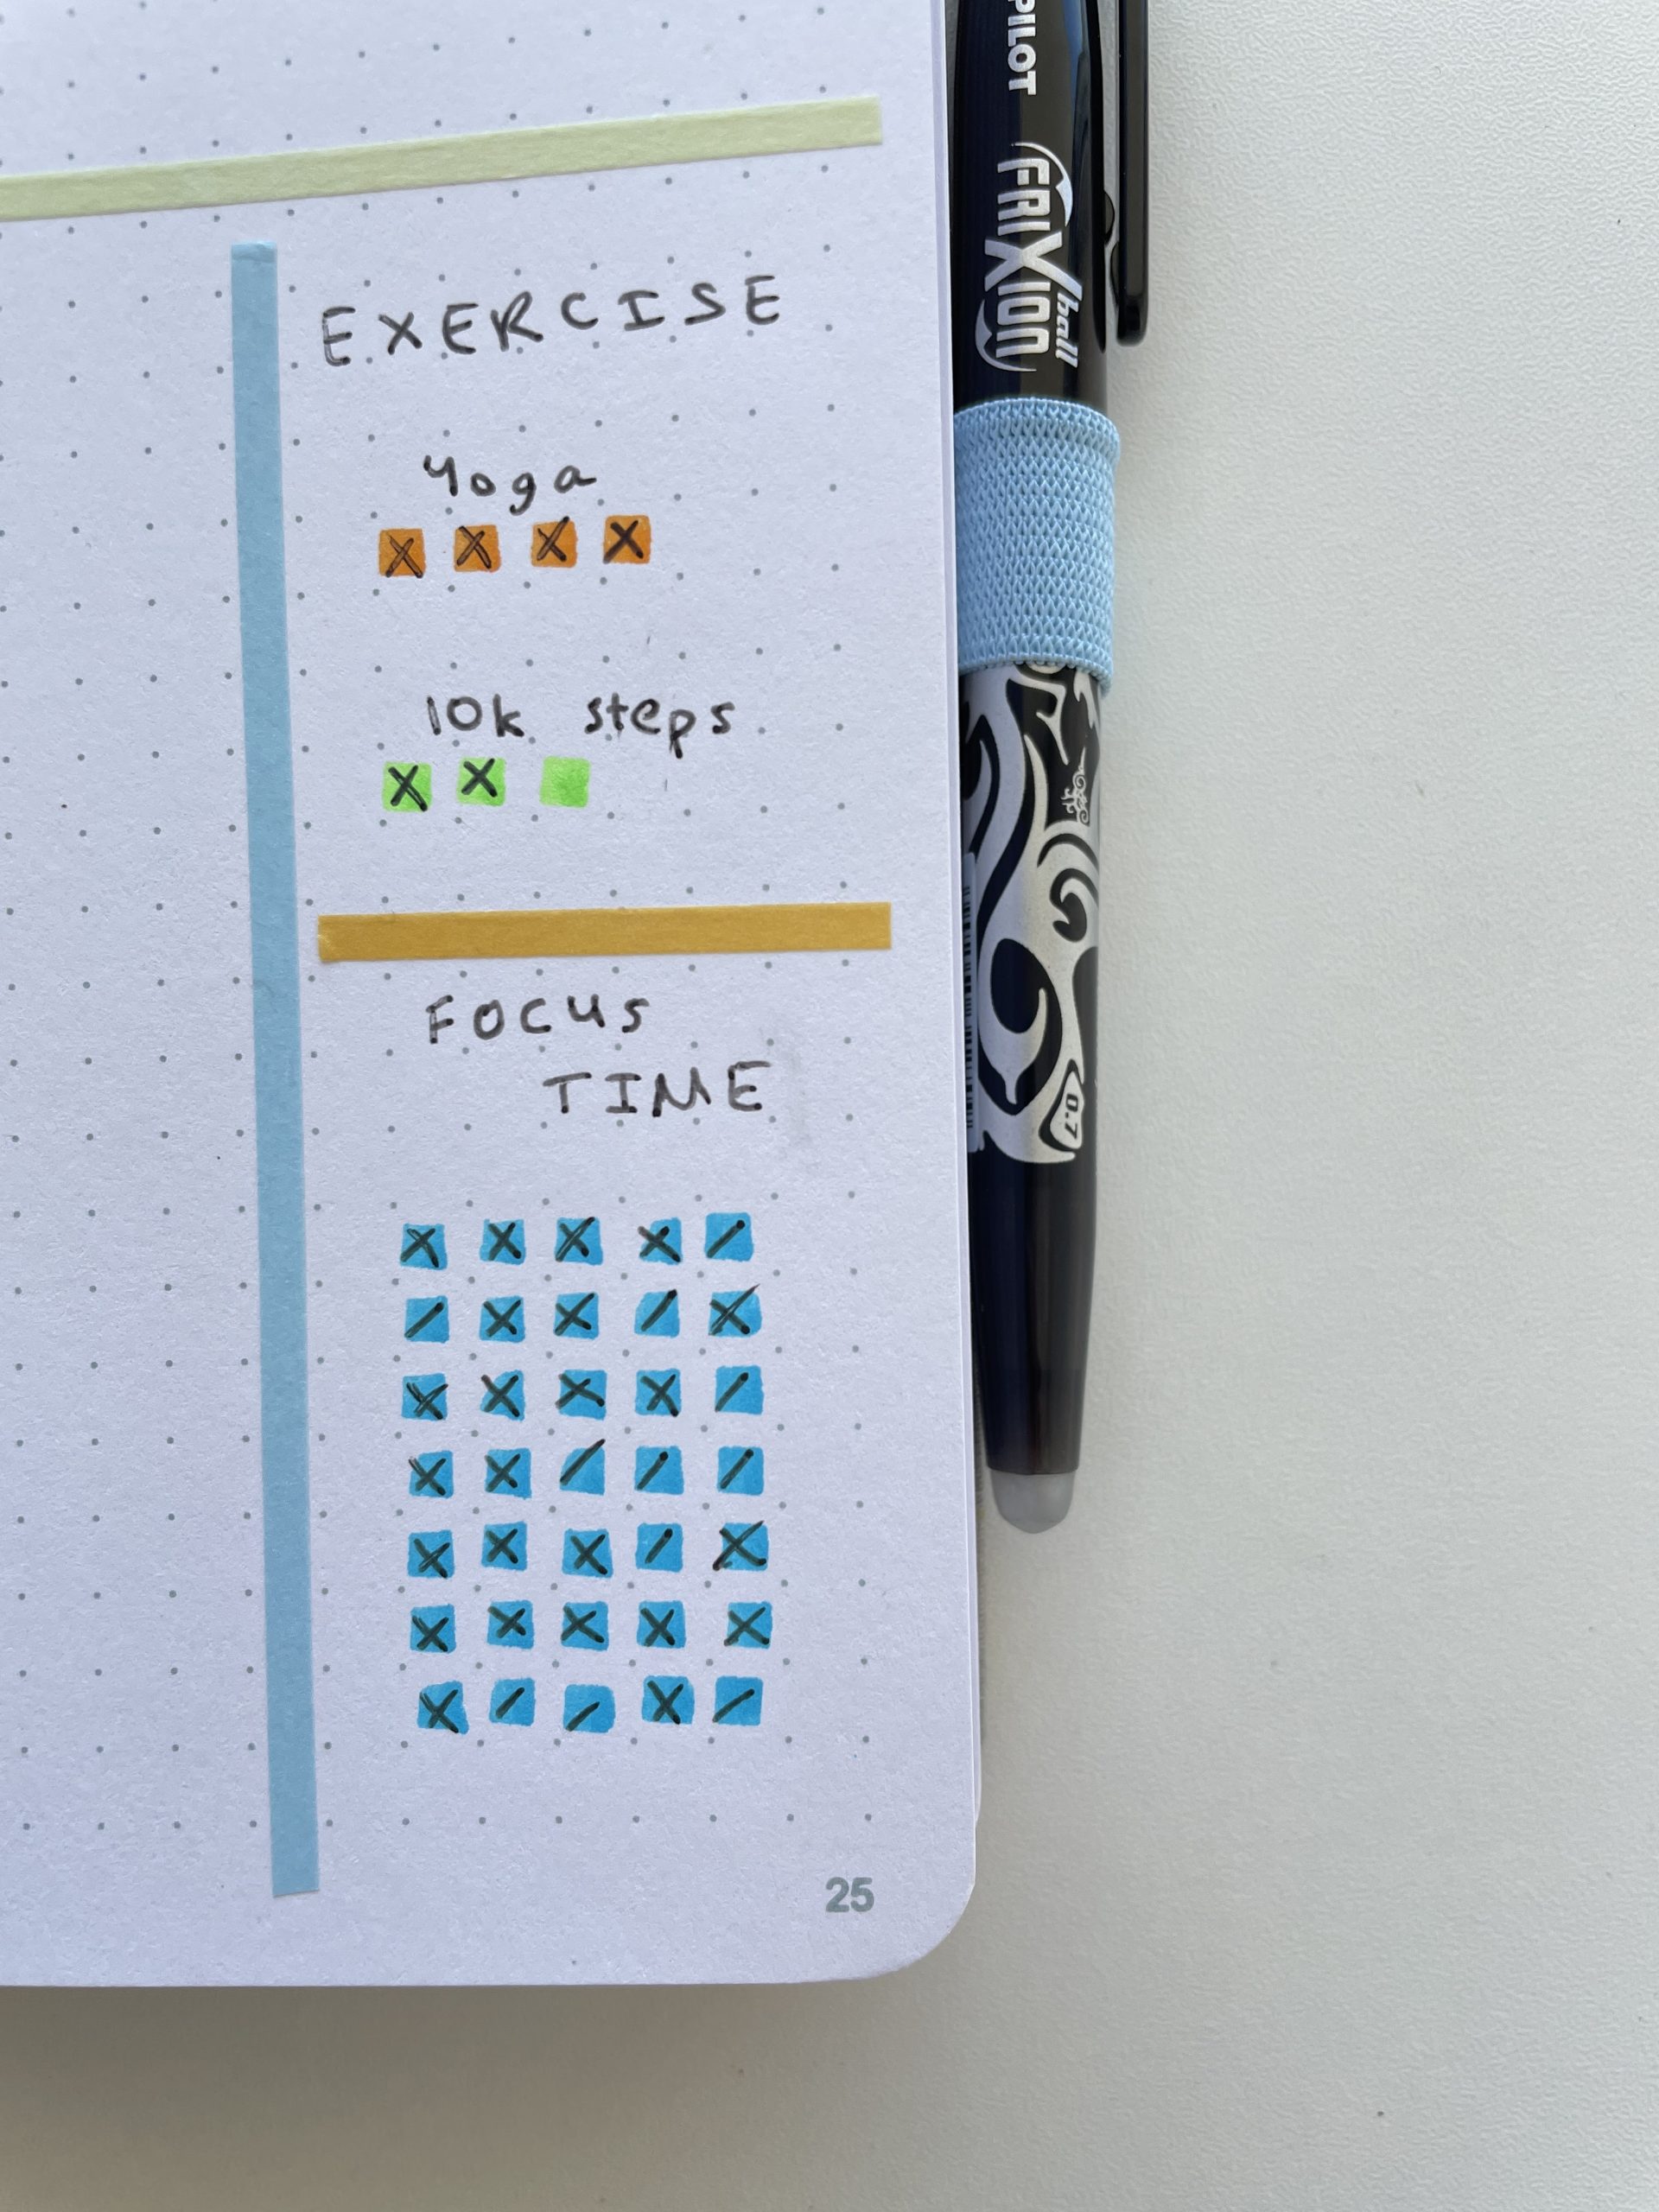 bullet journal sections to add to your daily or weekly planner focus time pomodor tracker exercise 10k steps dot e pens from japan for habit tracking